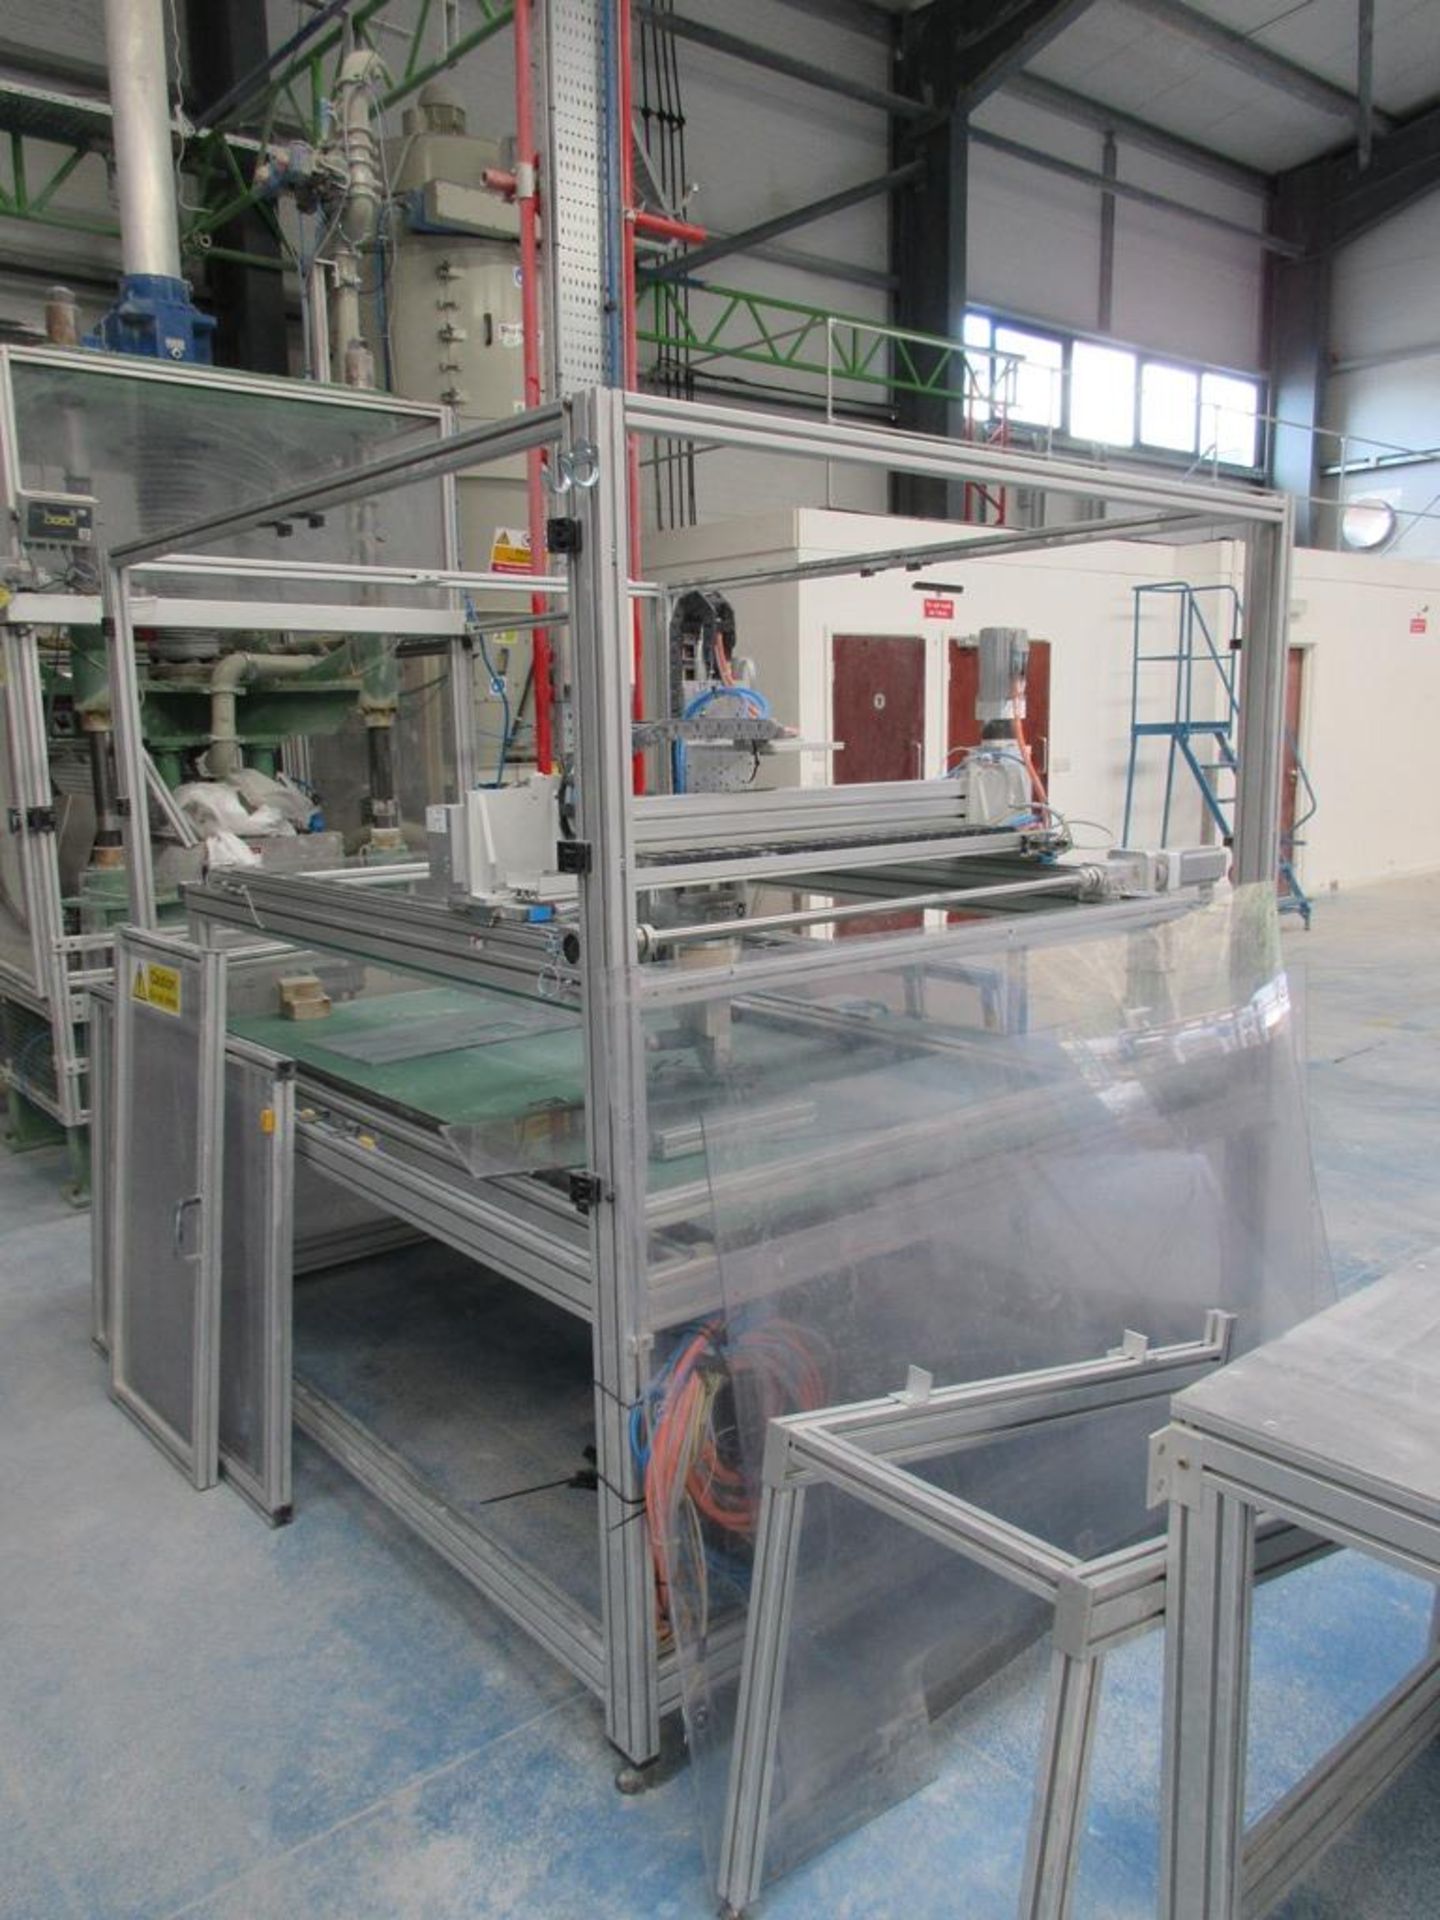 Gasbarre insulation board, 28 tonne electric press, serial no. 20201571, bed size 680 x 980mm, - Image 5 of 12